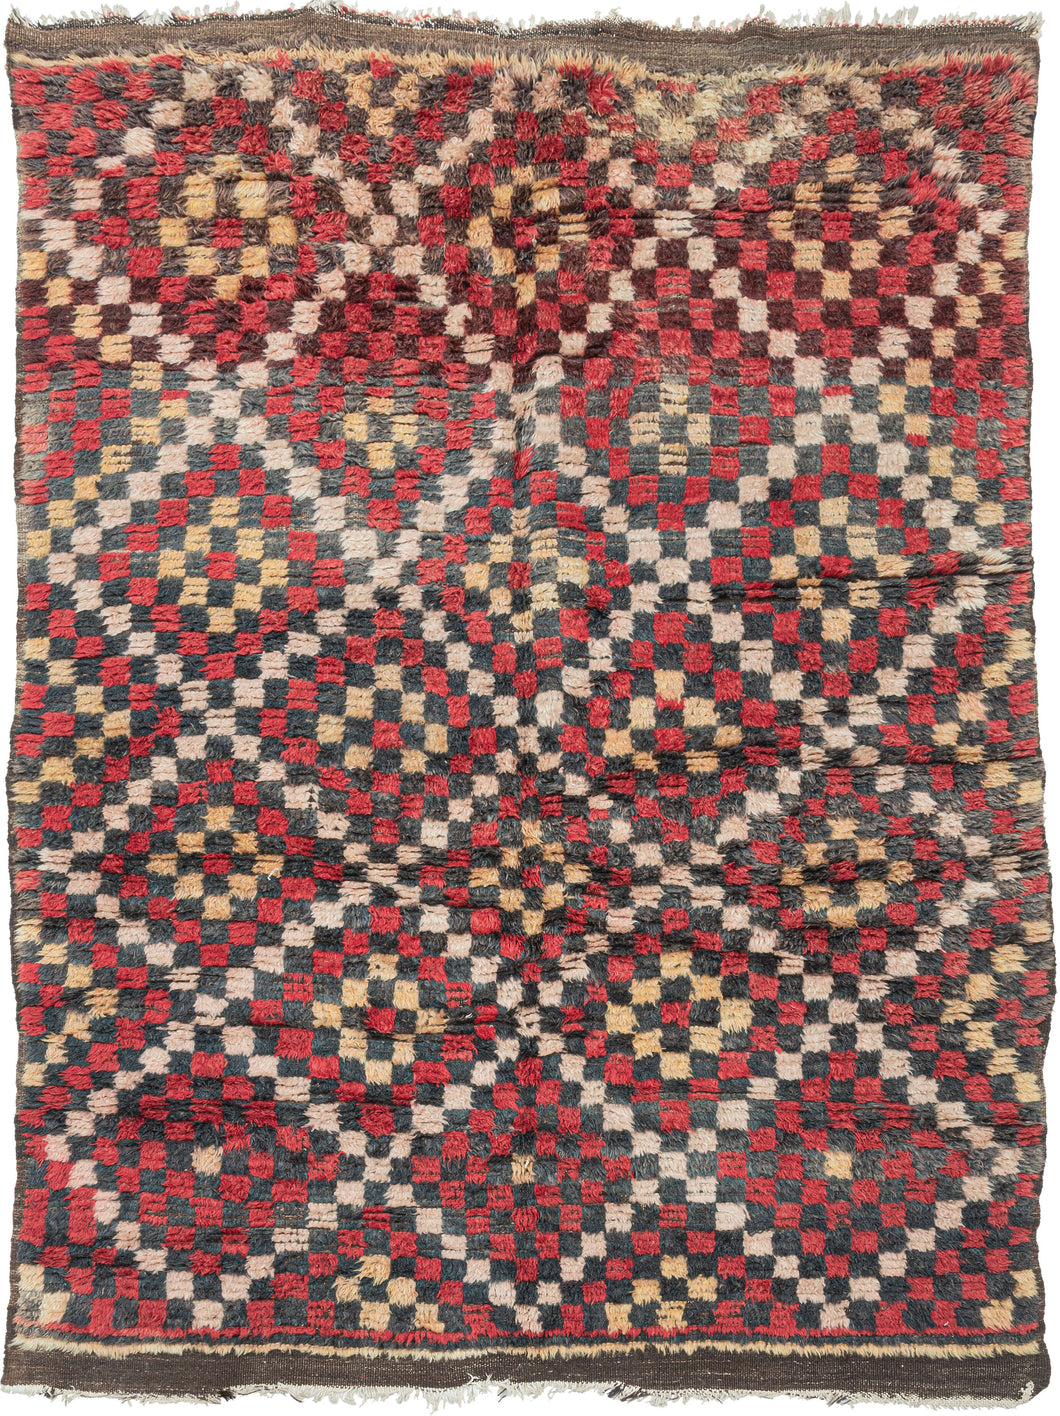 This Geometric Turkish Tulu  features a pattern of intersecting concentric diamonds formed of various squares in red, black, yellow and ivory. Coarsely rendered in shaggy wool creating a plush pile.   In good condition, with uneven fading and wear near the ends. Pile is thick and shaggy, with a soft handle. 